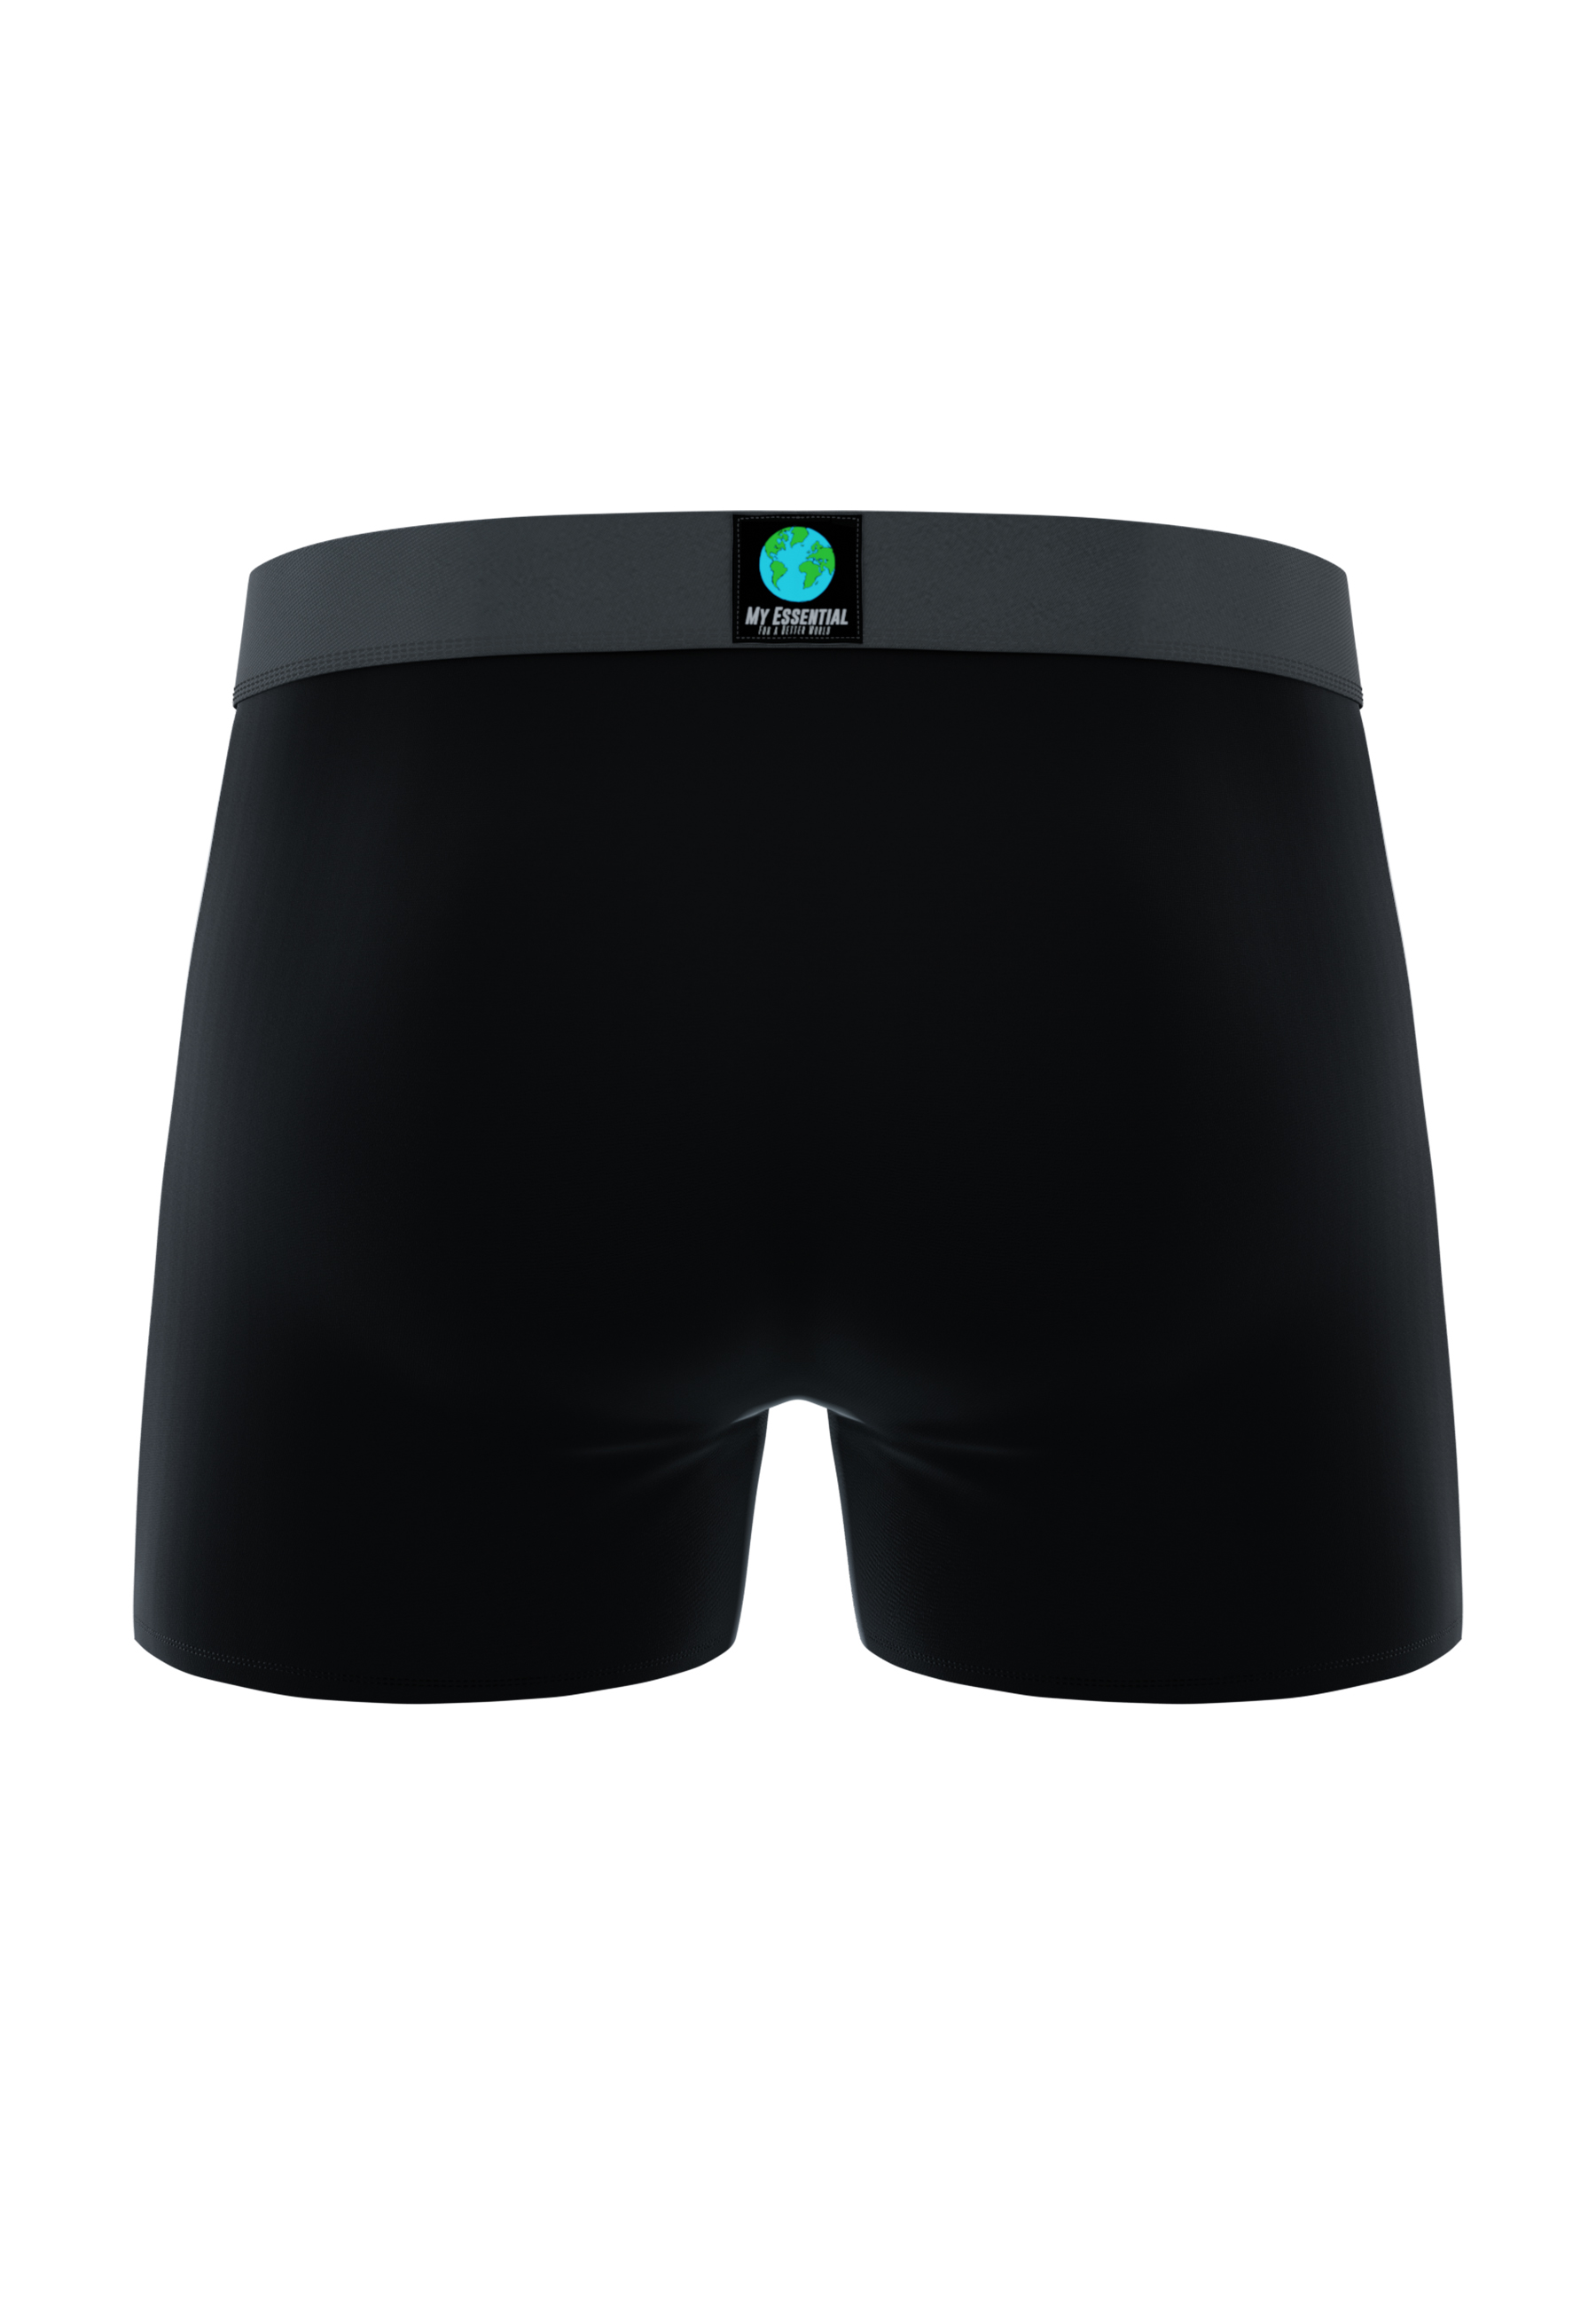 MY ESSENTIAL CLOTHING 3-Pack Boxershorts all black L